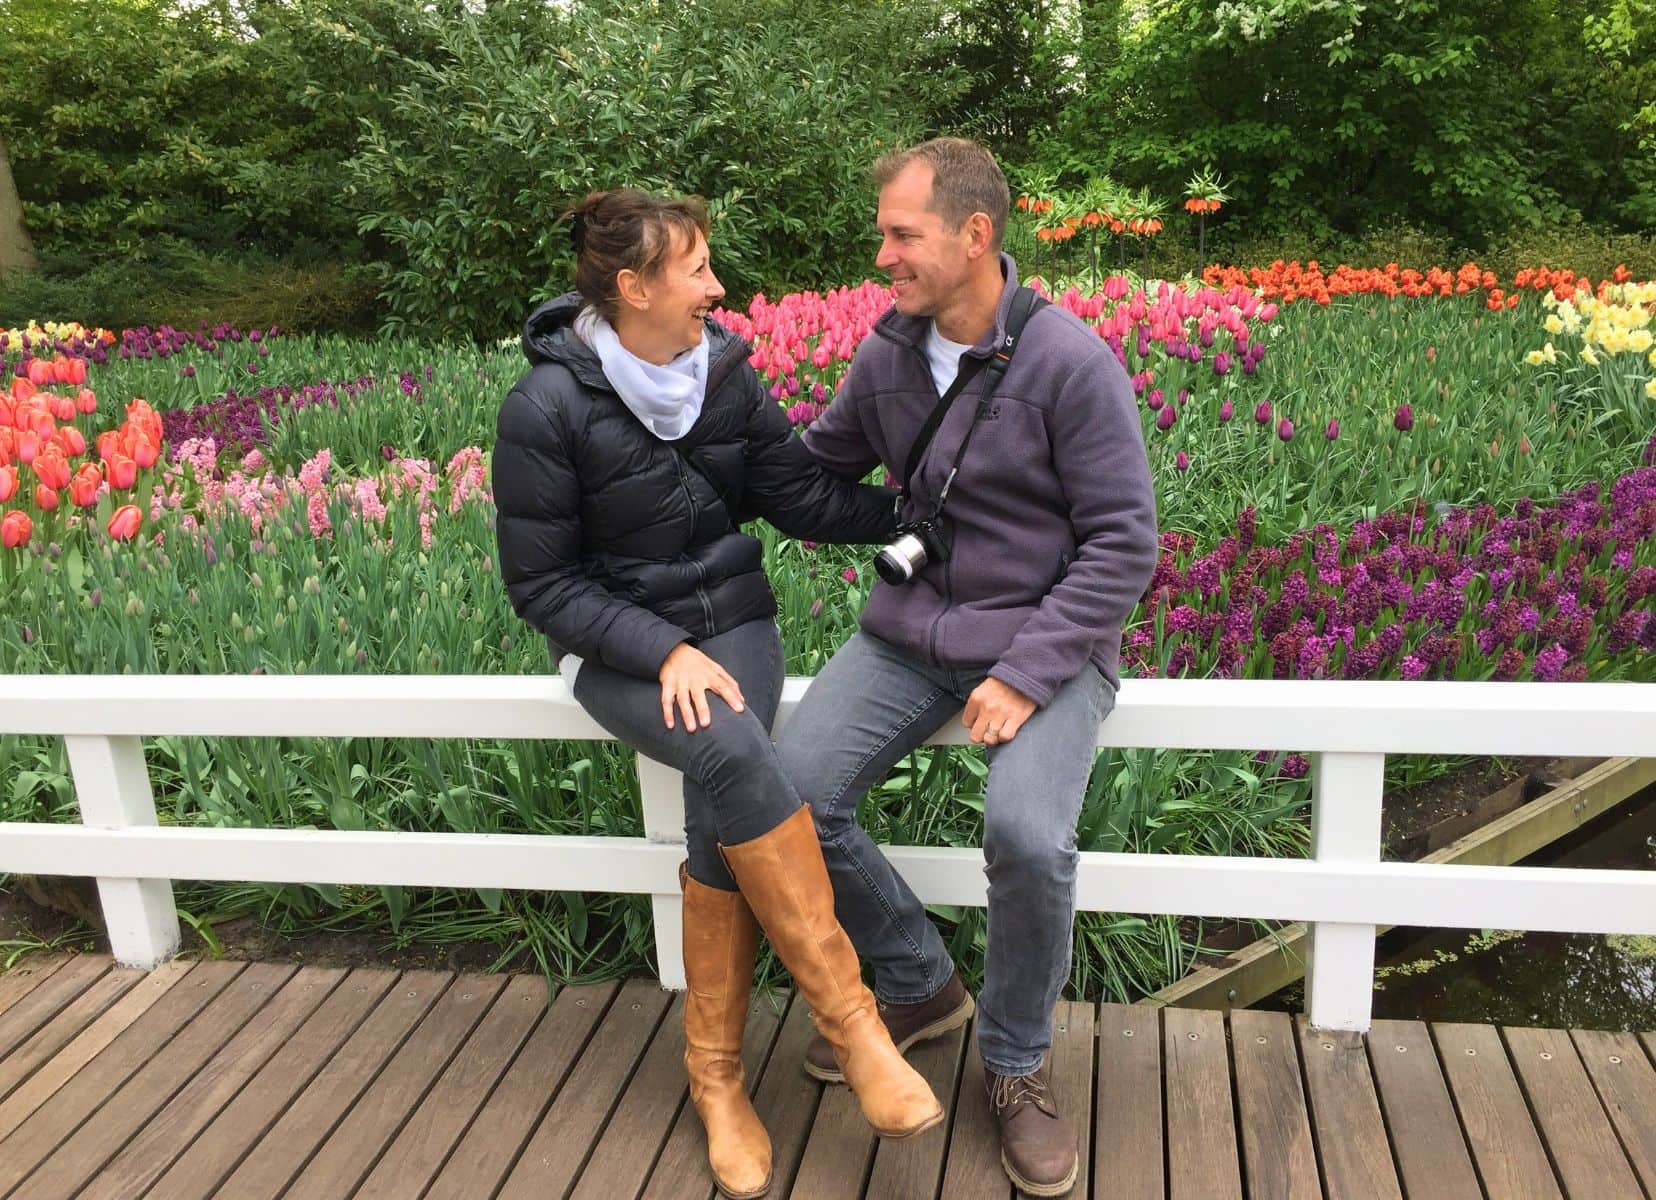 Lars and shelley sat laughing with field of tulips behind them - laughing together is one of our travel tips for couples. 